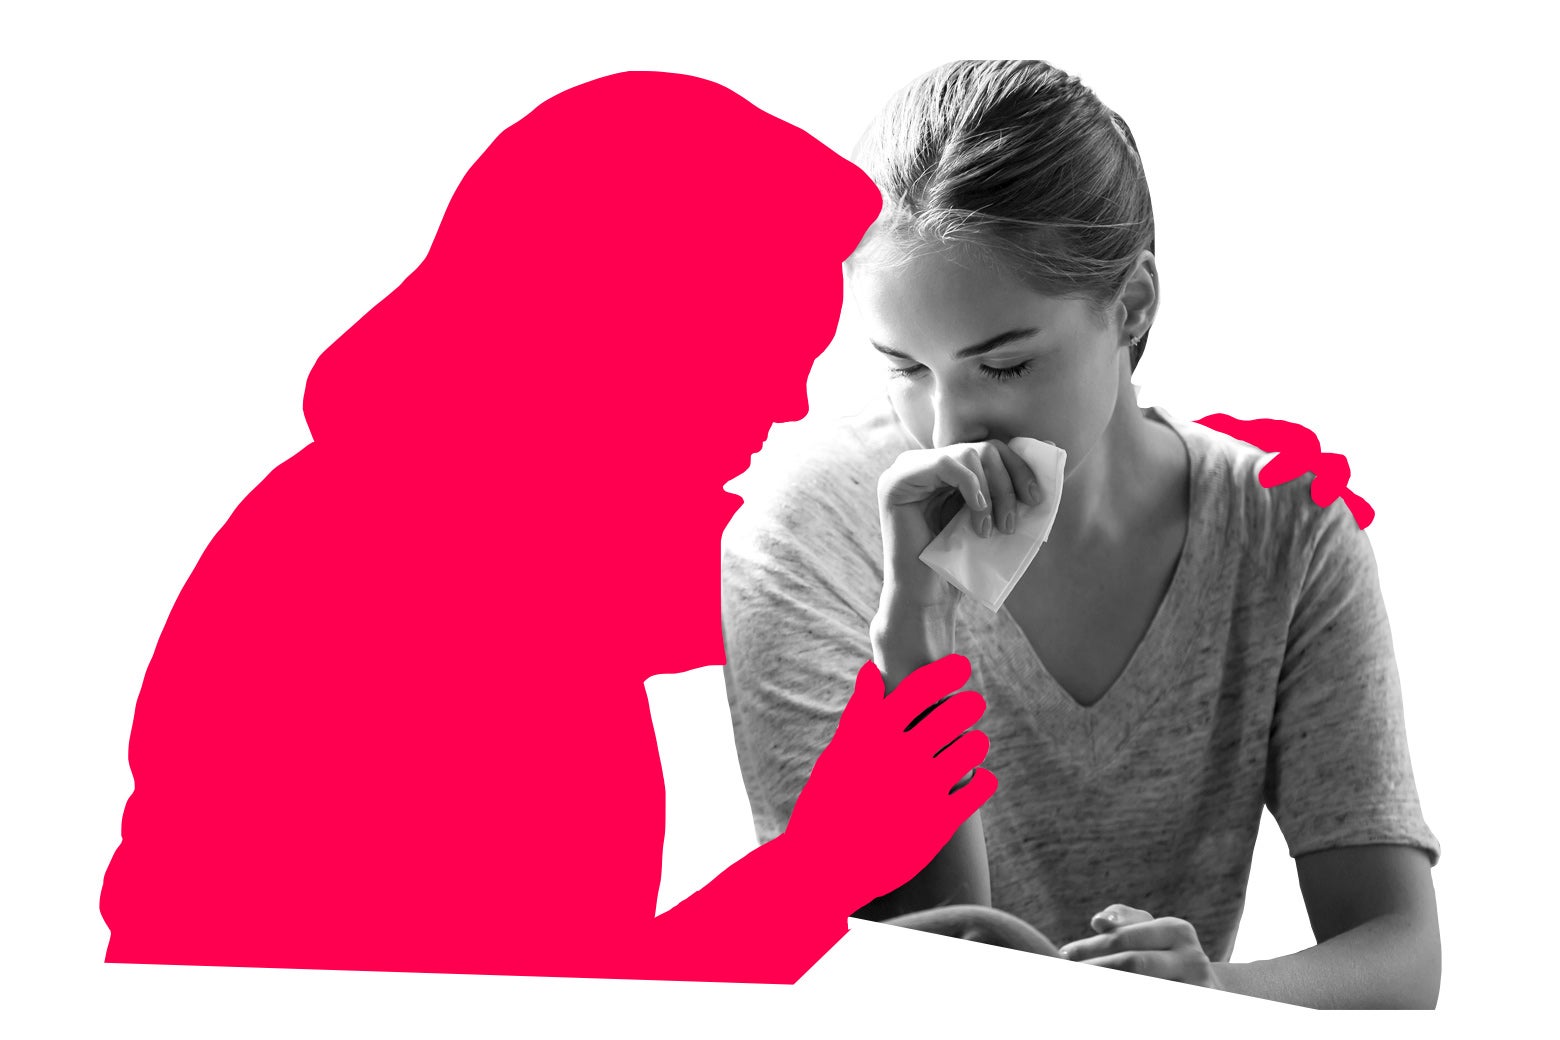 A person with a tissue in their hand is embraced by an illustrated silhouette.